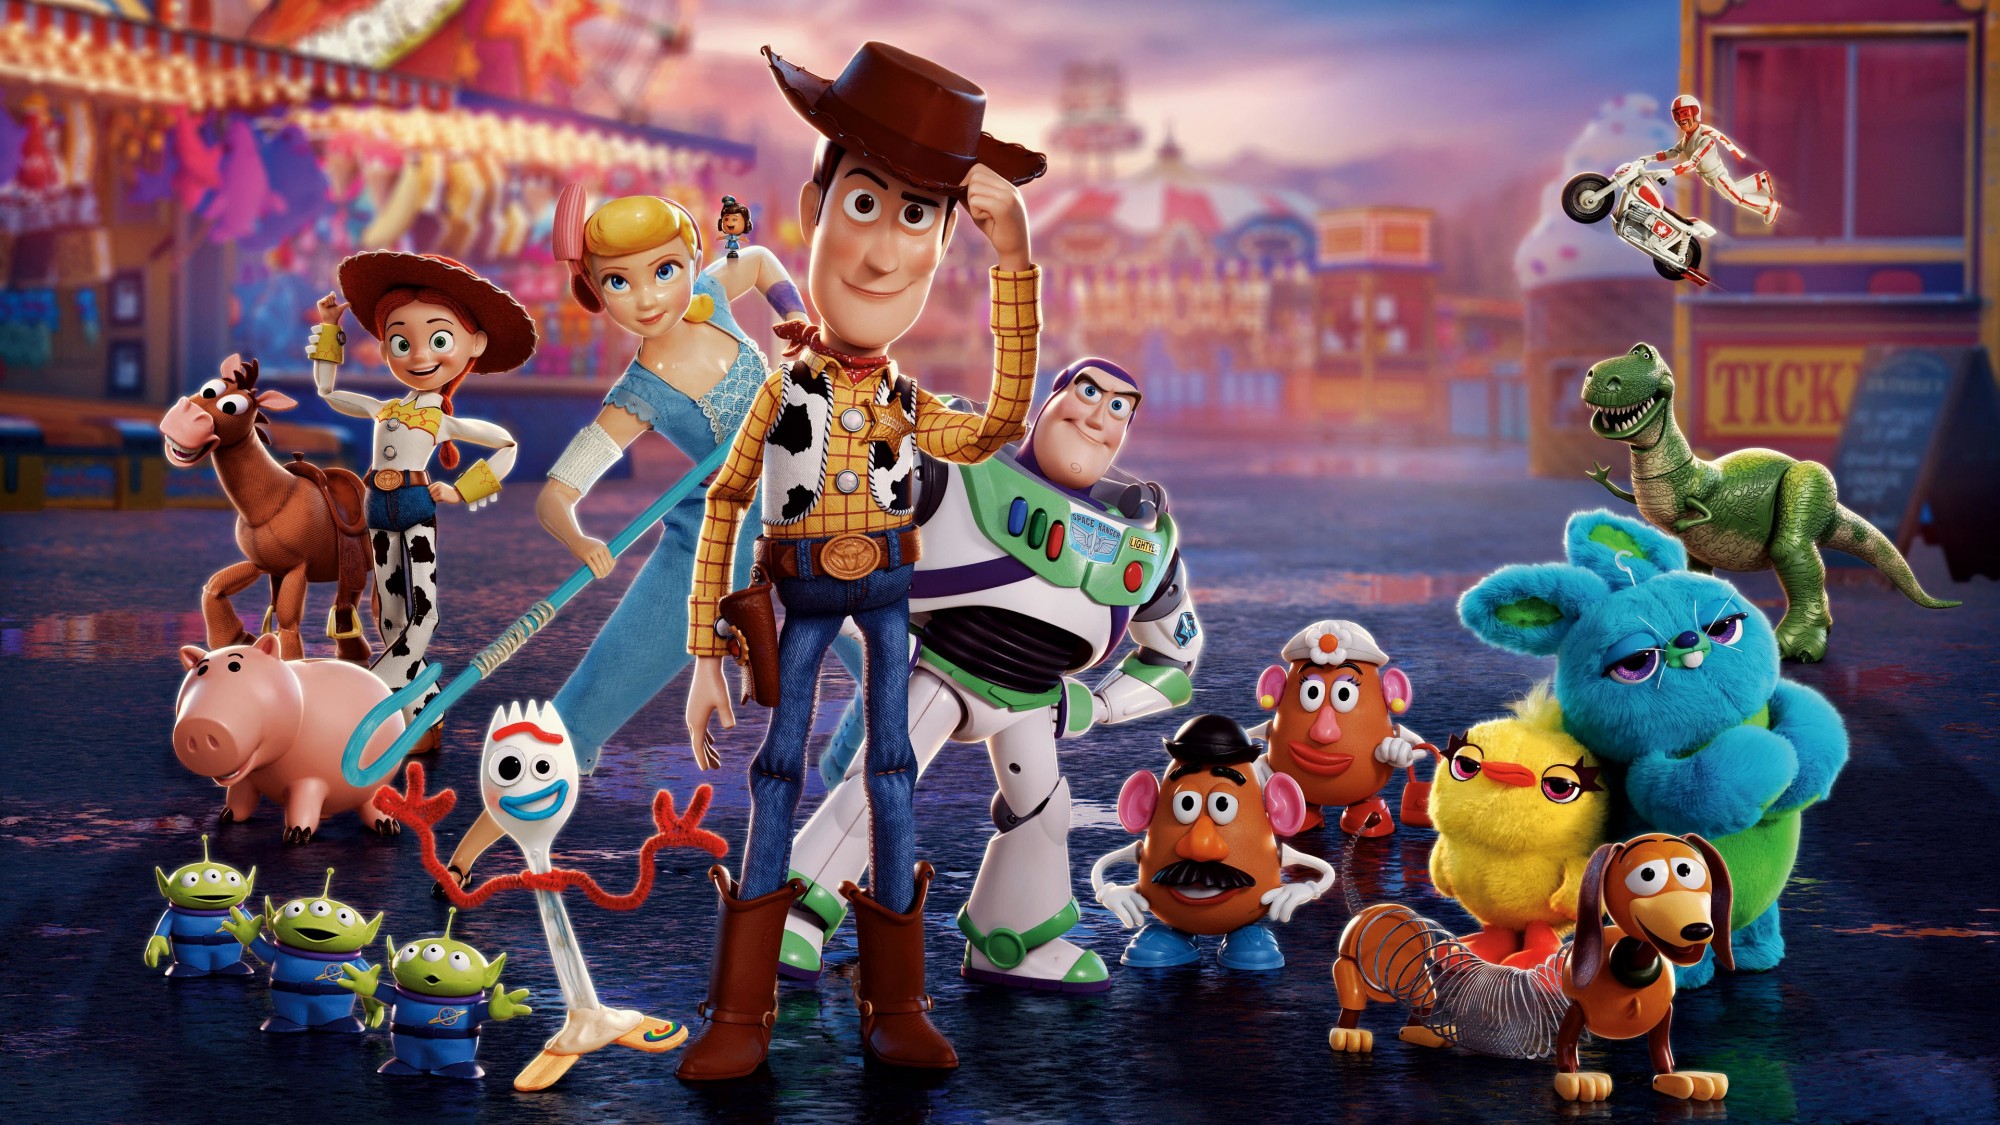 "Toy Story 4" is notably absent from the Disney+ movie li...